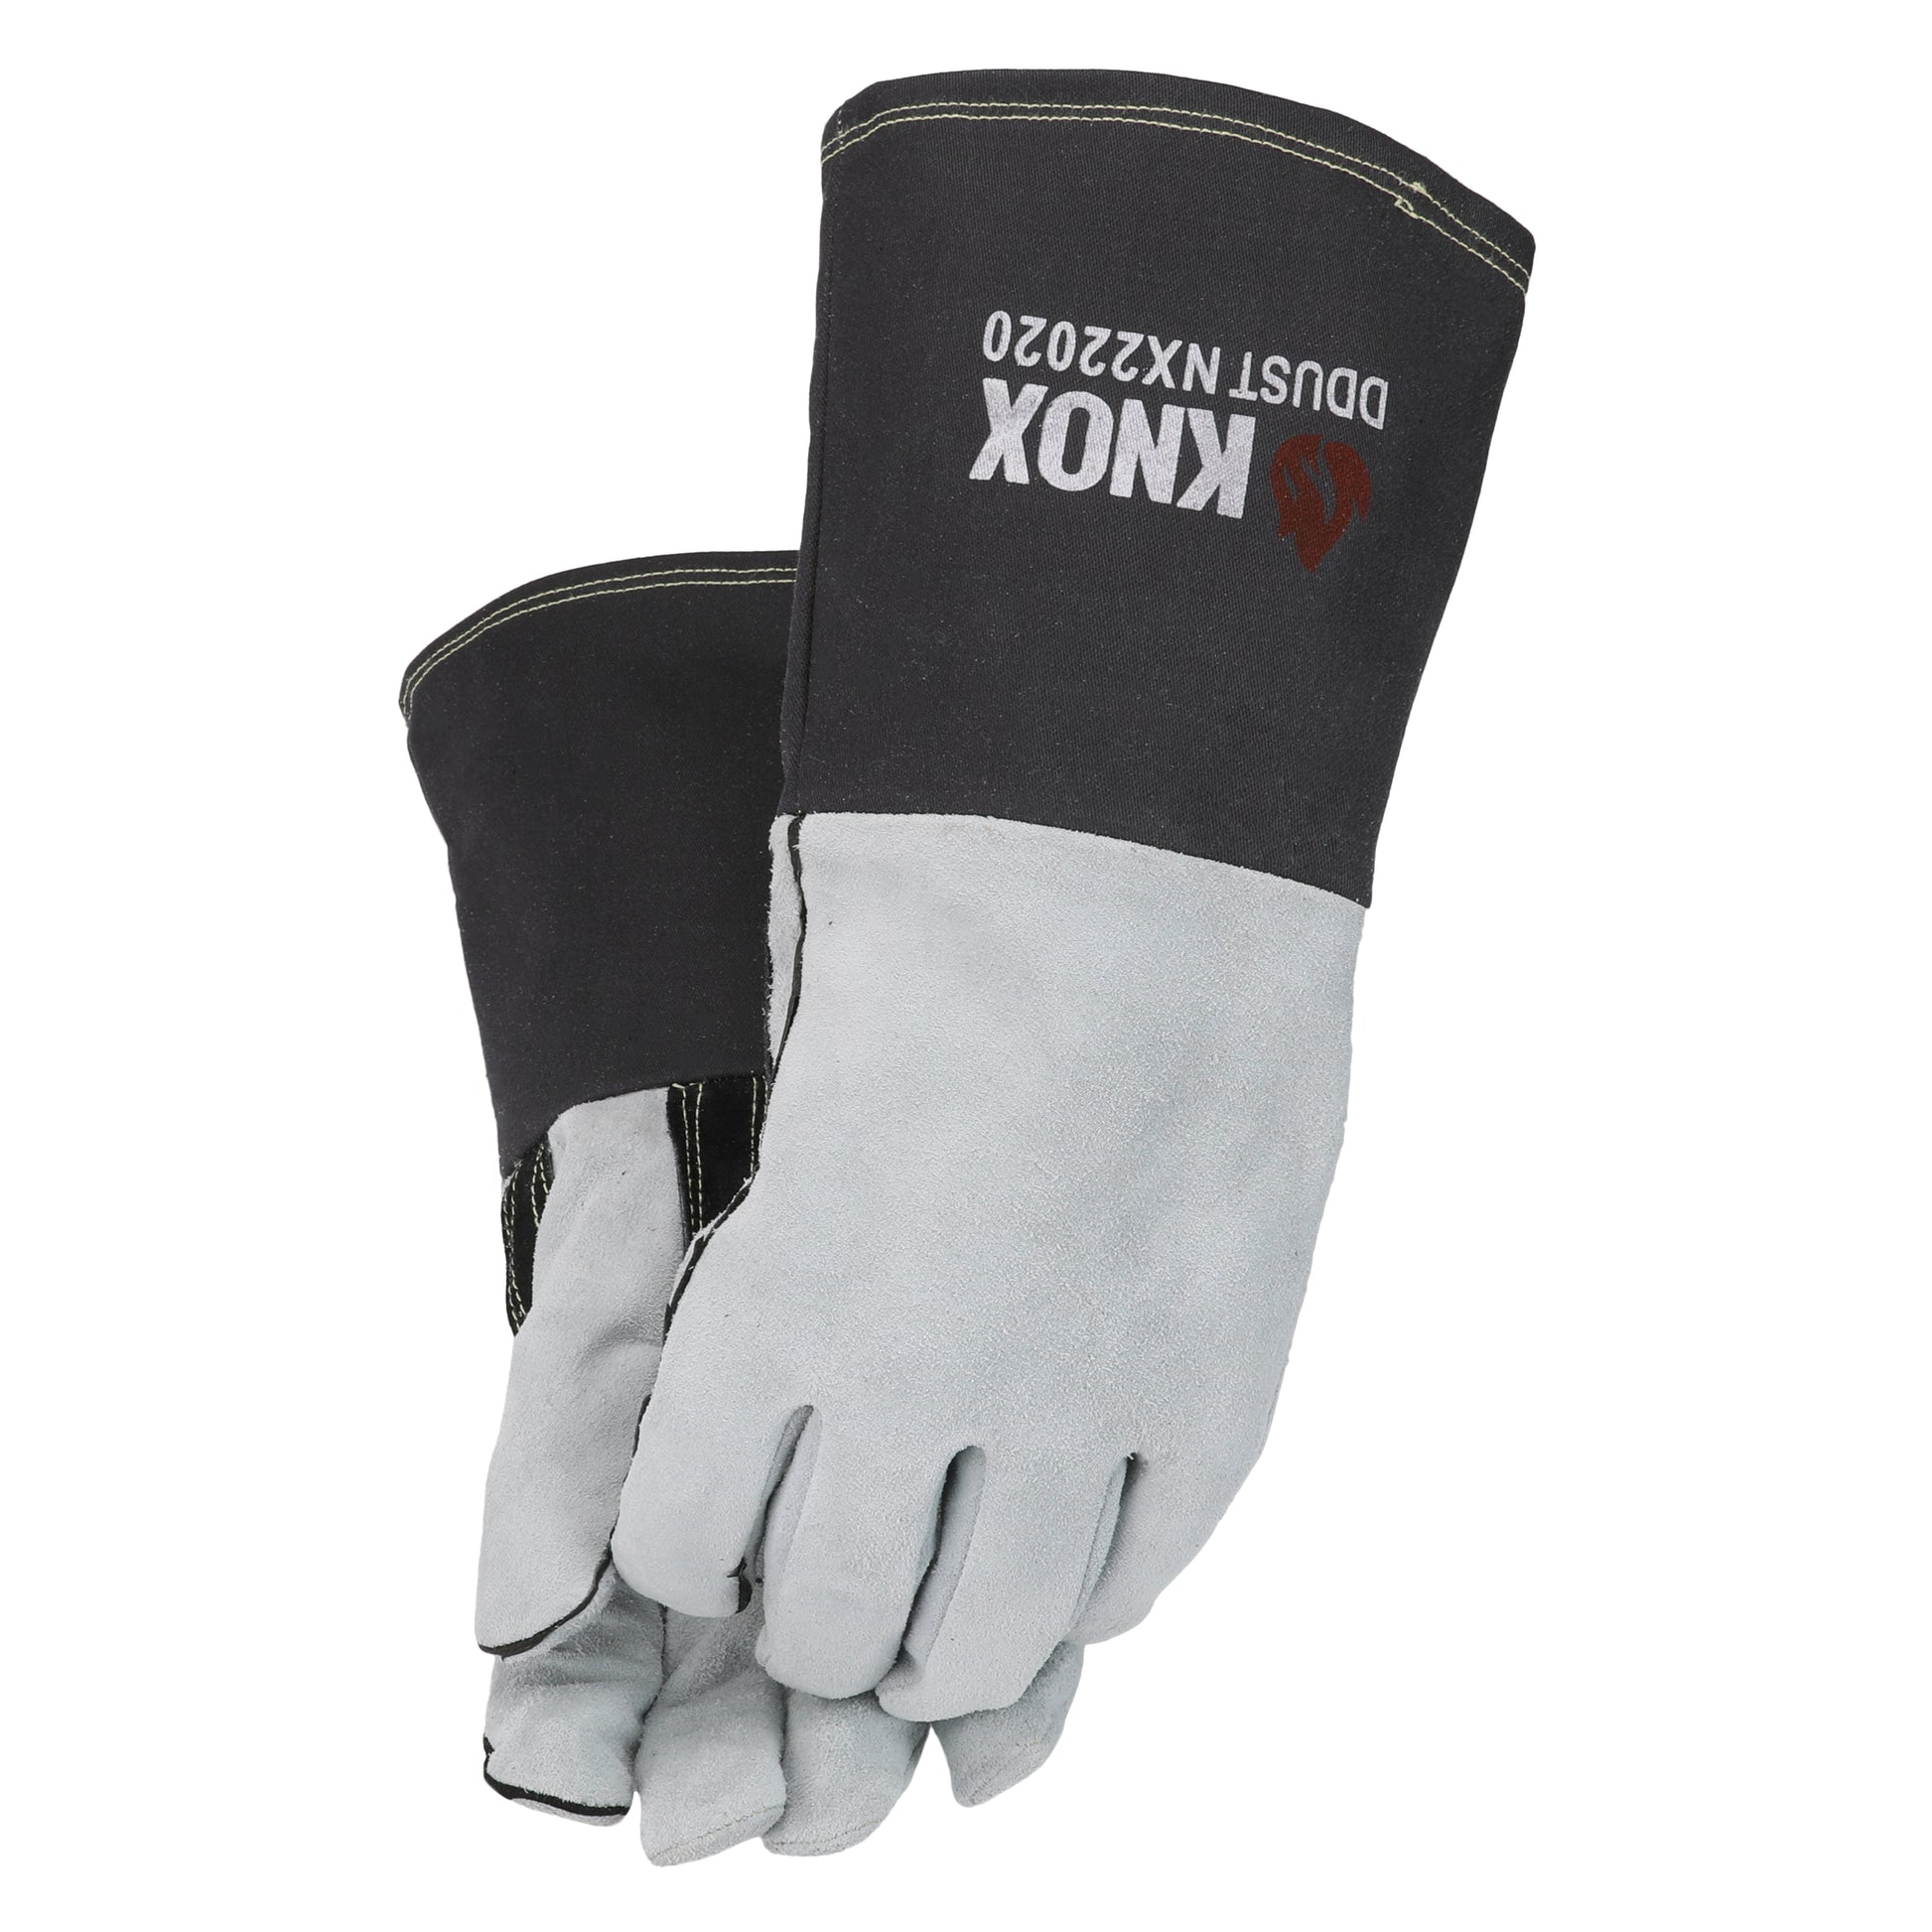 Knox Welding Sleeves for Men & Women, 21 Inches FR Arm Protection Sleeves